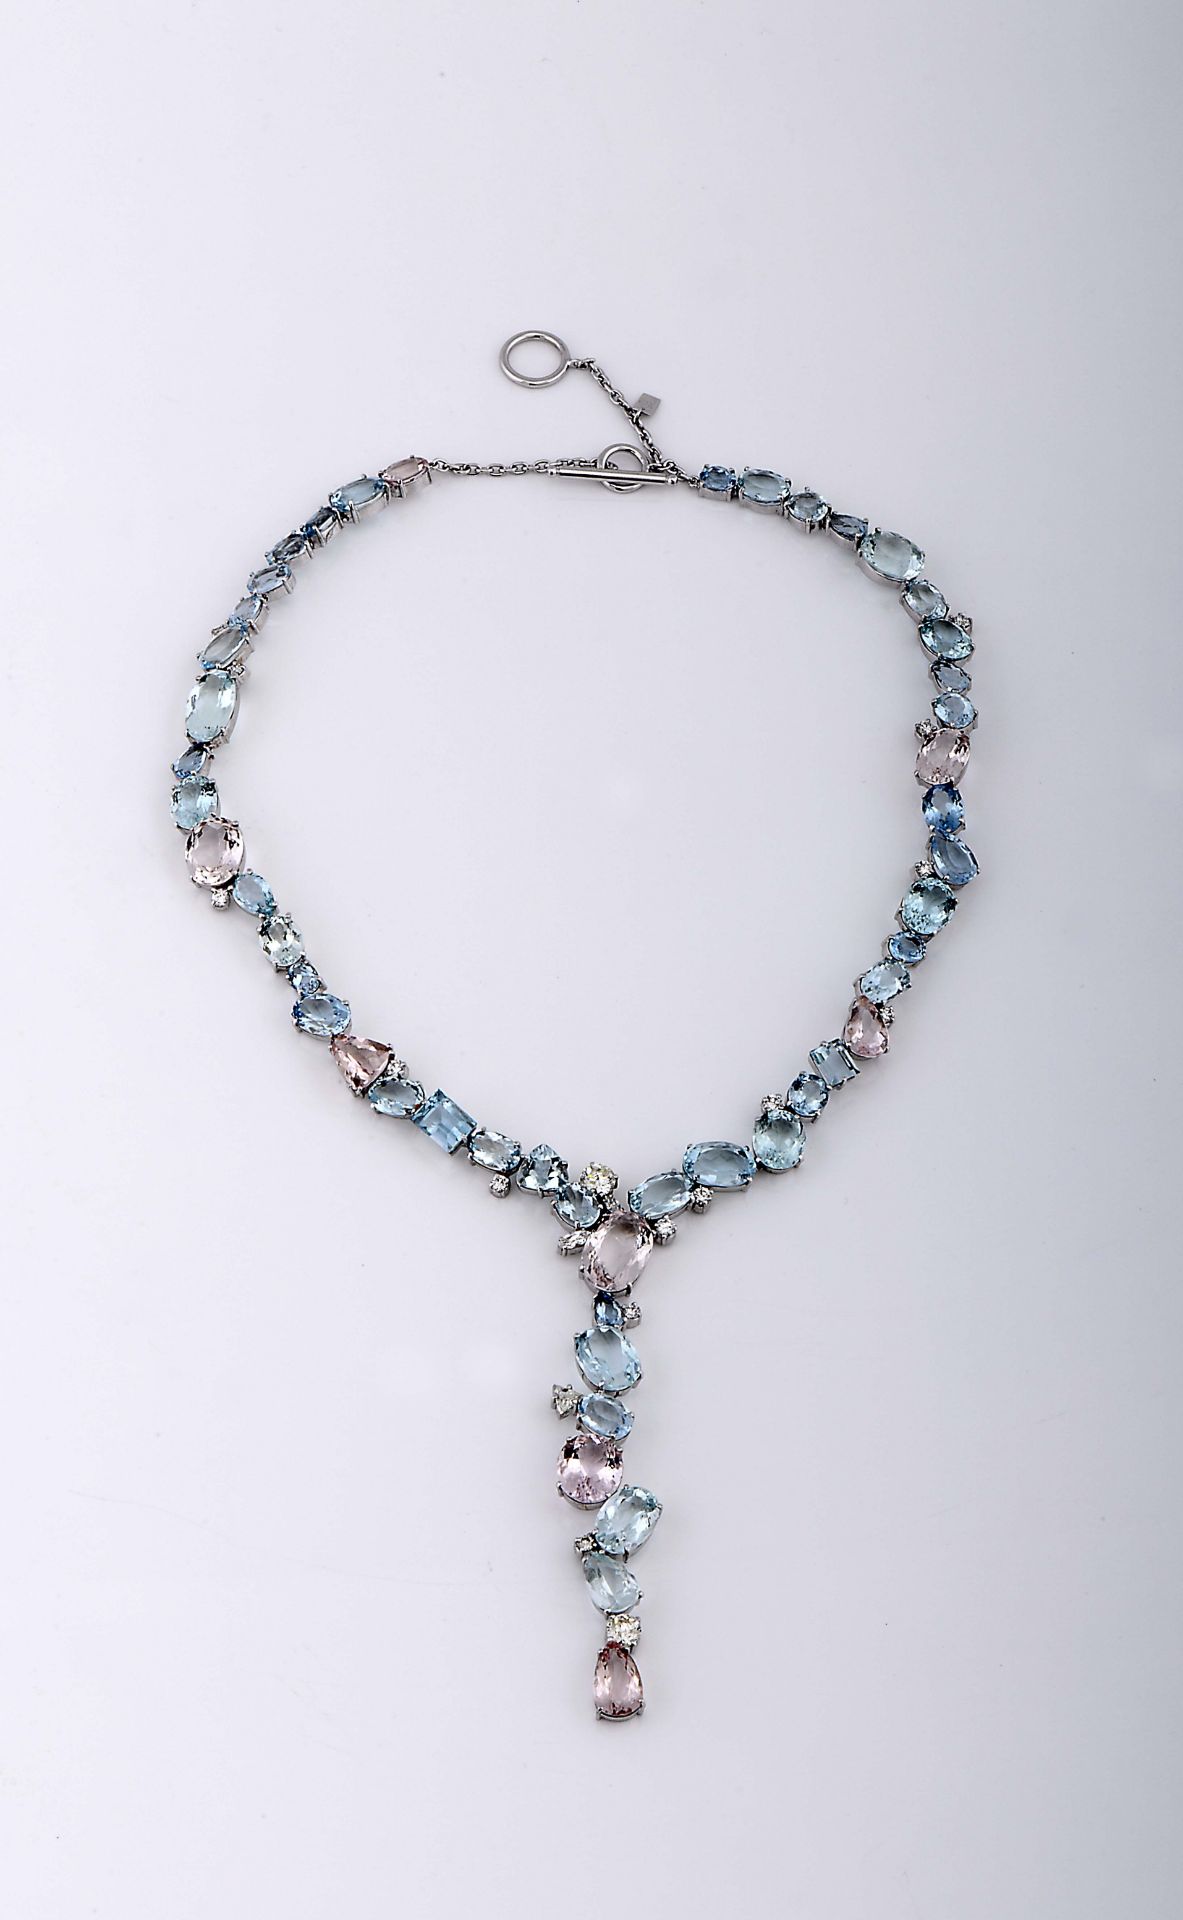 A necklace - Image 2 of 10